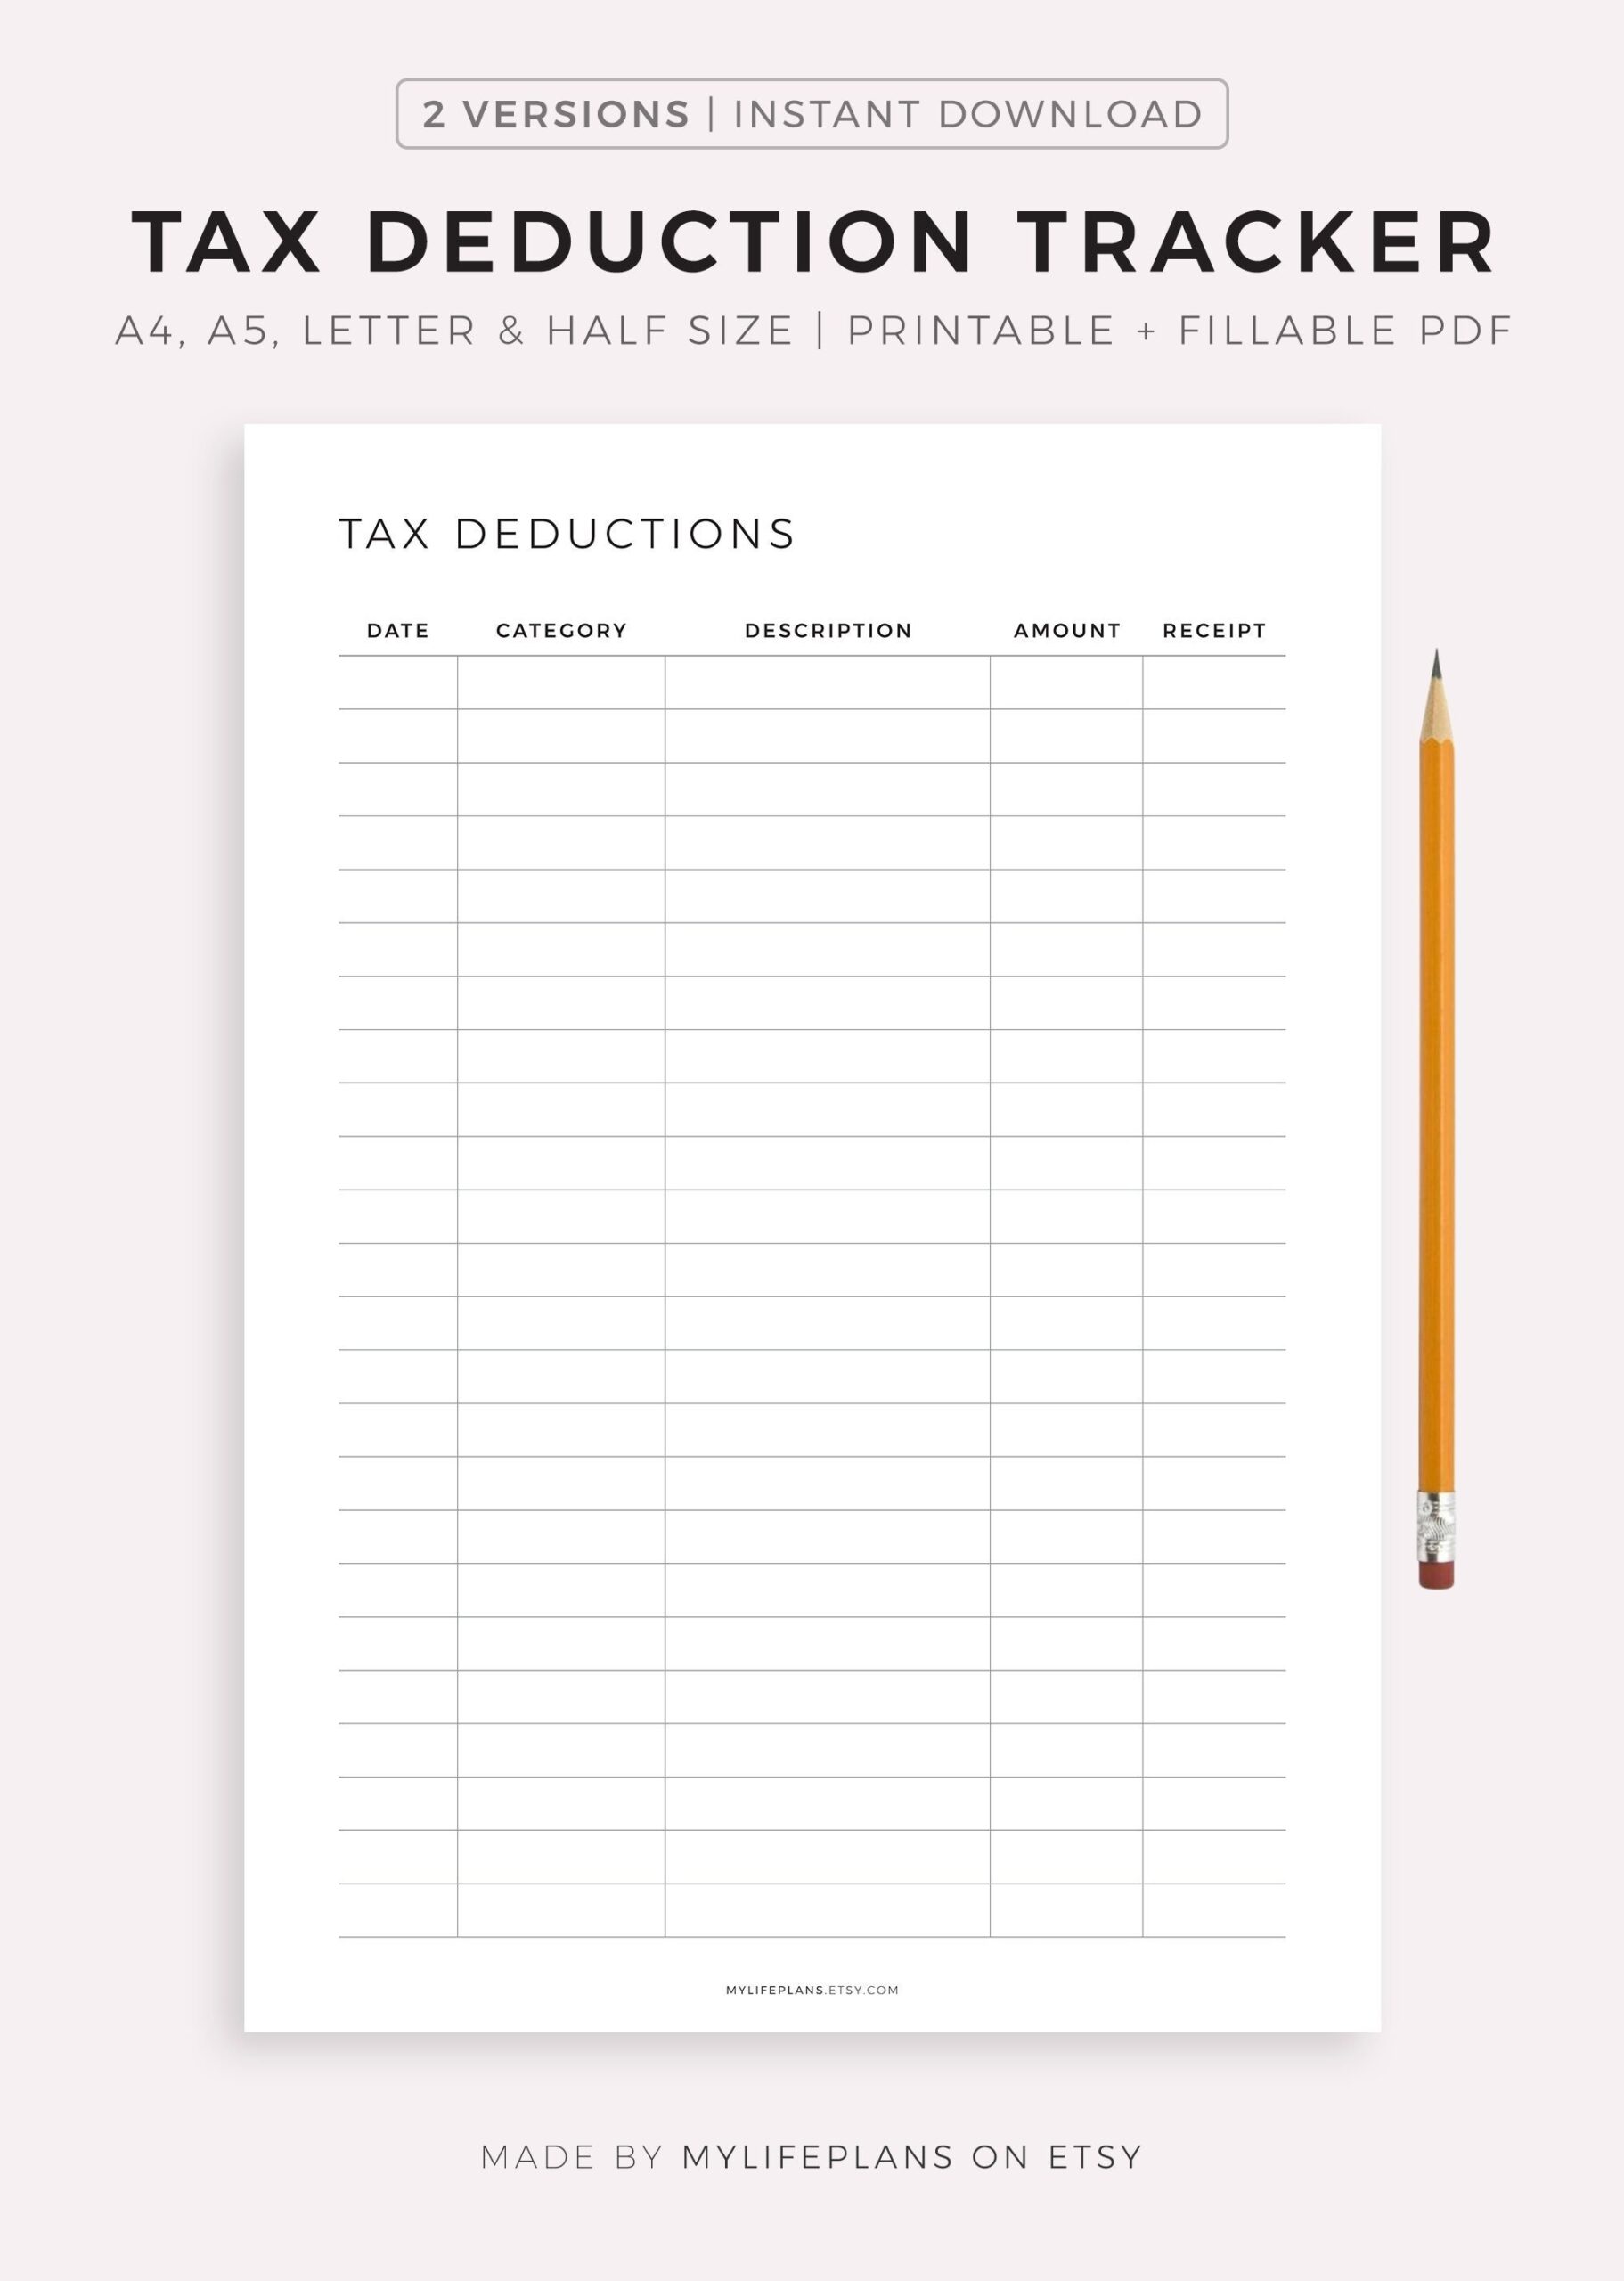 Printable Tax Deduction Tracker Business Tax Log Purchase Records Tax Organizer Budget Template A4 a5 letter half Instant Download PDF Etsy